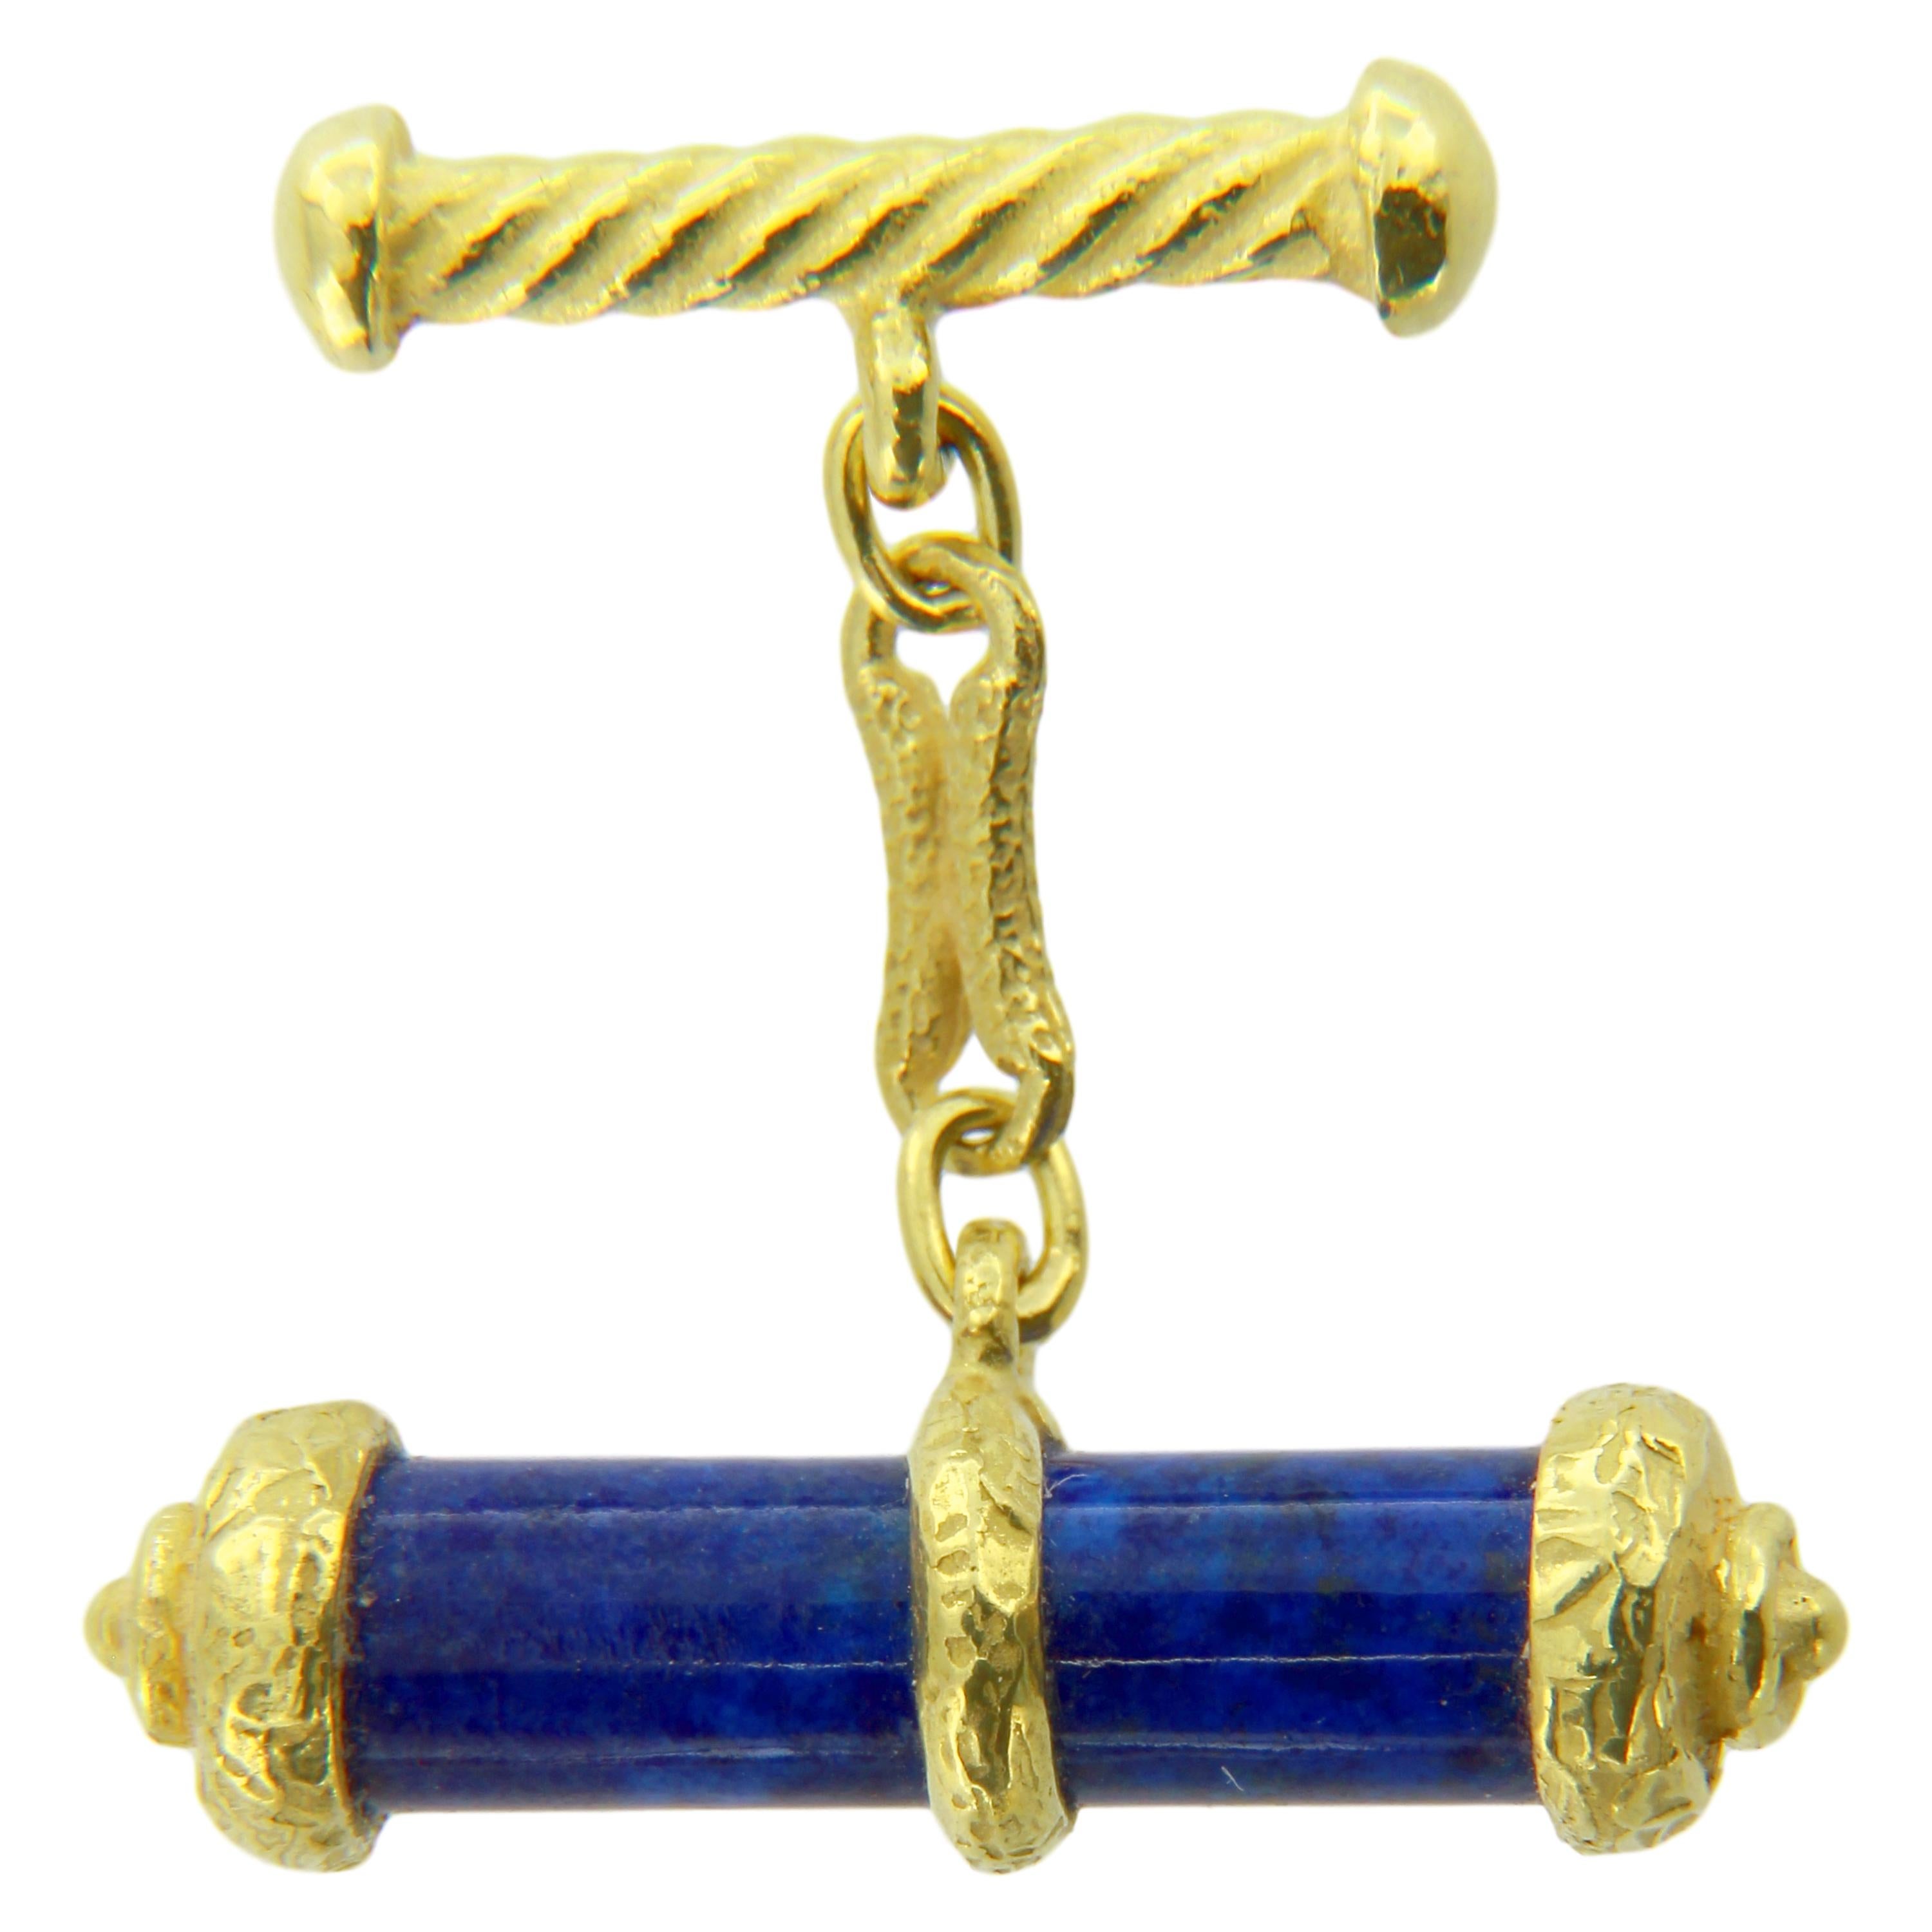 Gorgeous Lapis Lazuli Gemstone Satin Yellow Gold Cylinder Chain Cufflinks hand-crafted with lost-wax casting technique.

Lost-wax casting, one of the oldest techniques for creating jewellery, forms the basis of Sacchi's jewellery production.